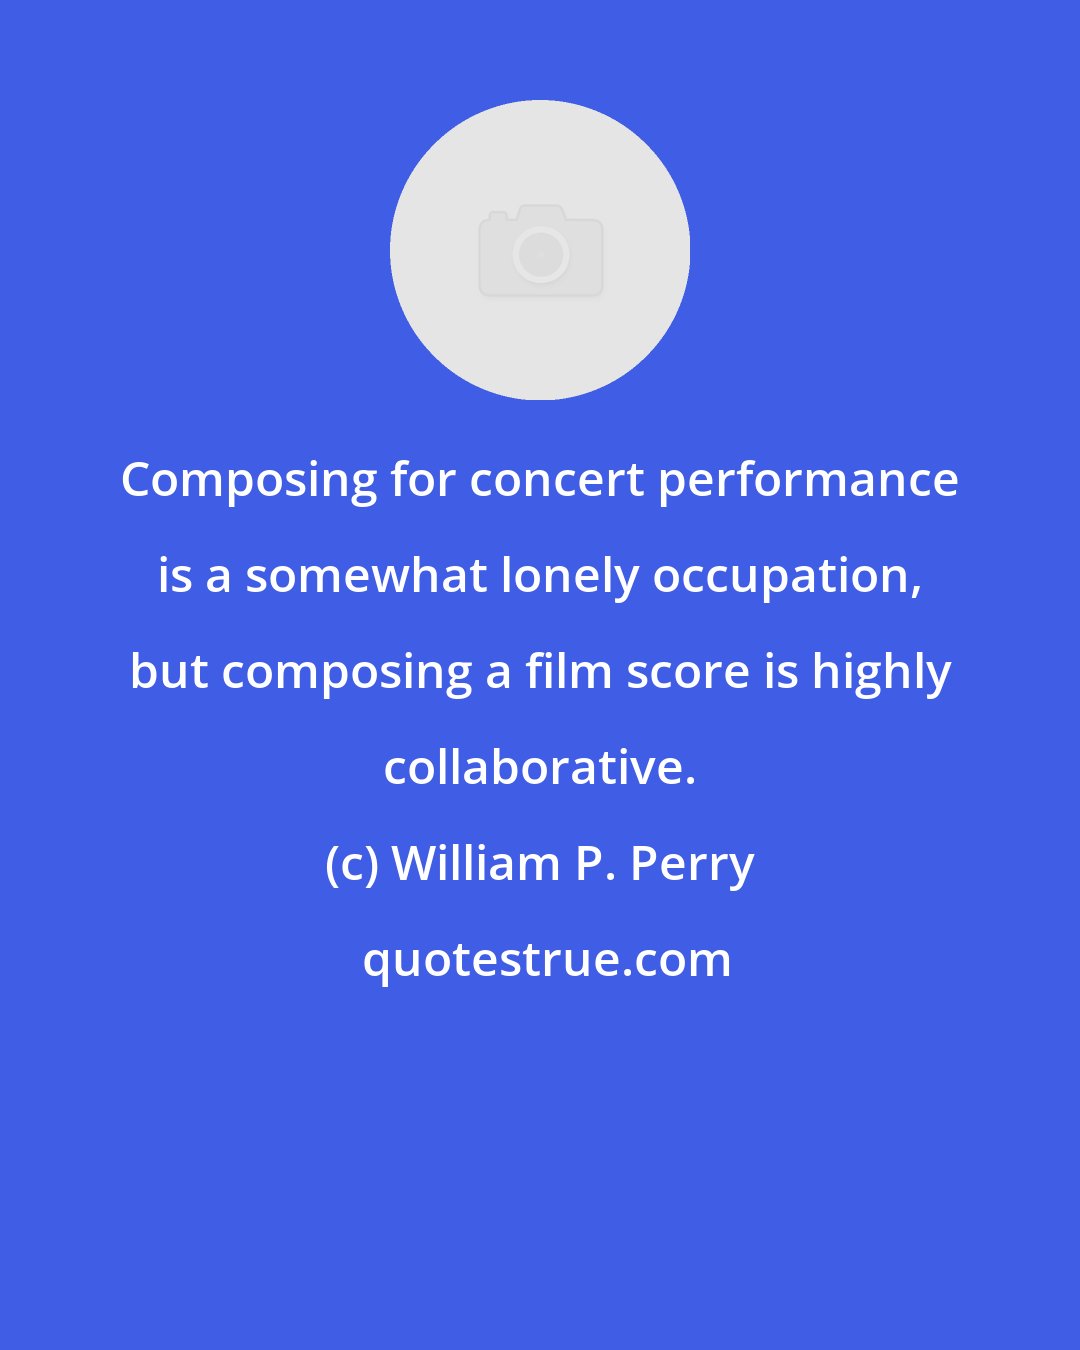 William P. Perry: Composing for concert performance is a somewhat lonely occupation, but composing a film score is highly collaborative.